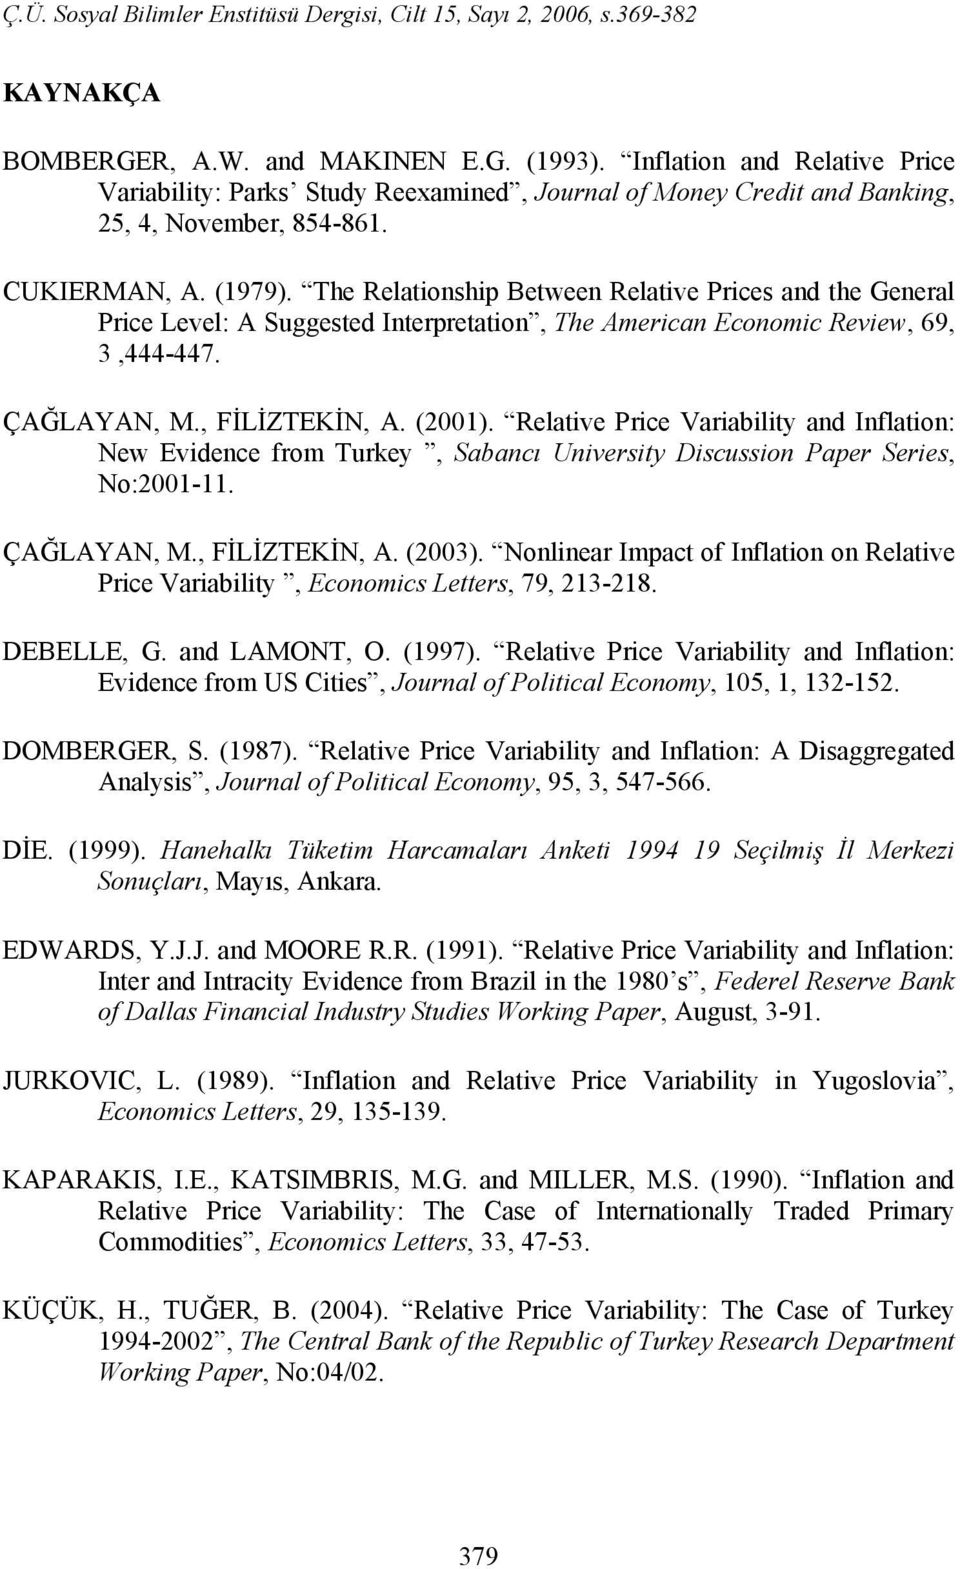 Relative Price Variability and Inflation: New Evidence from Turkey, Sabancı University Discussion Paper Series, No:2001-11. ÇAĞLAYAN, M., FİLİZTEKİN, A. (2003).